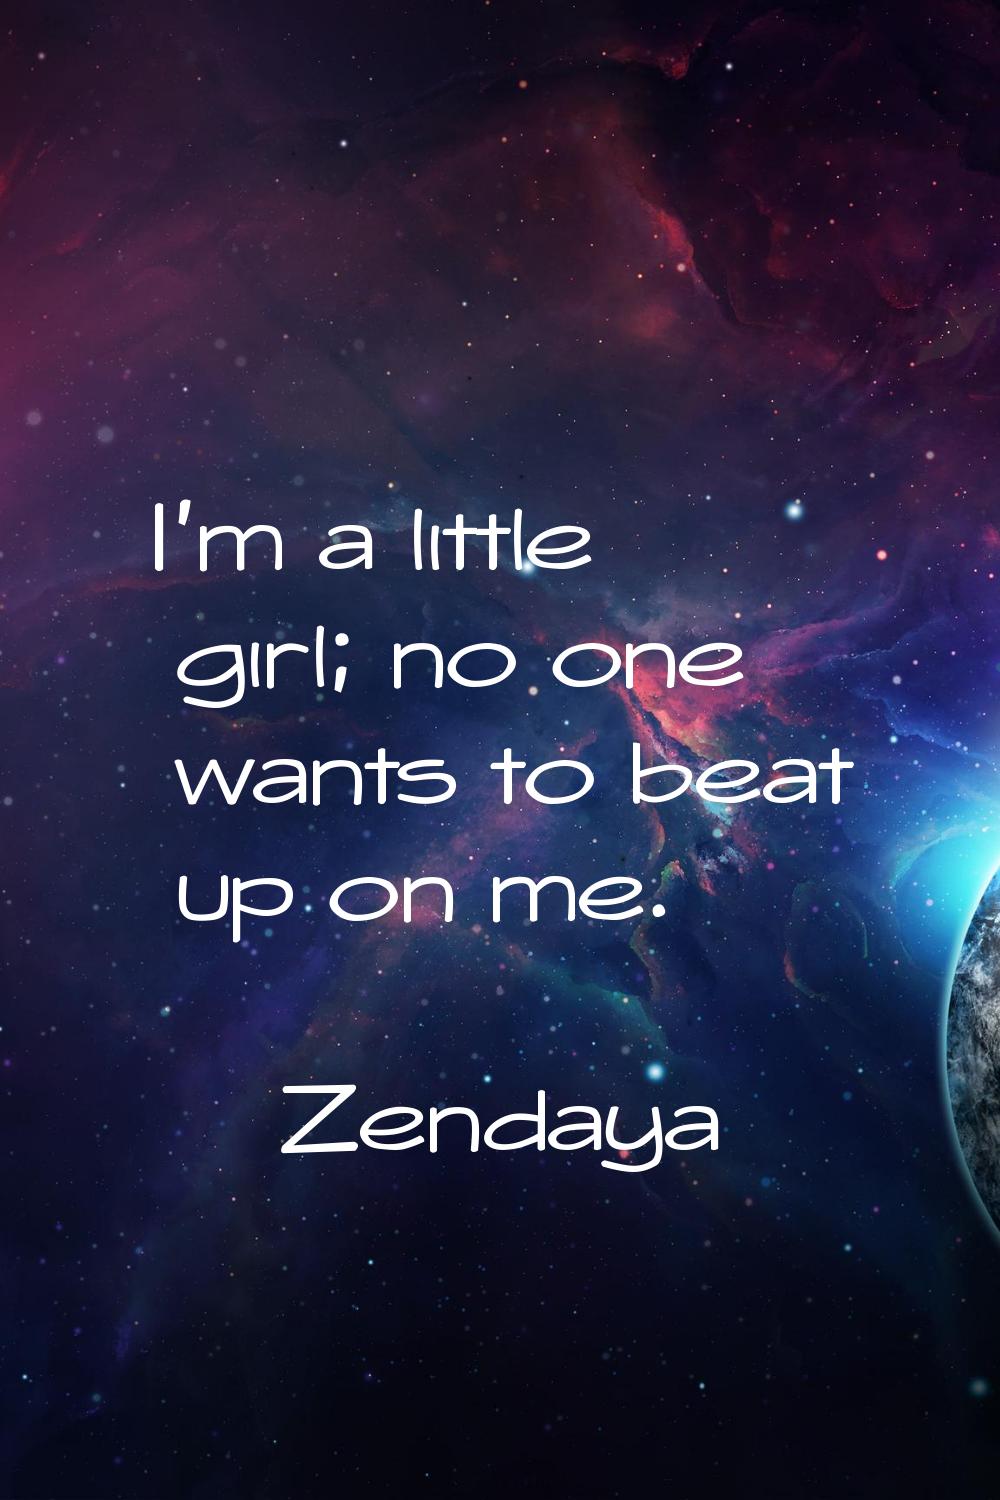 I'm a little girl; no one wants to beat up on me.